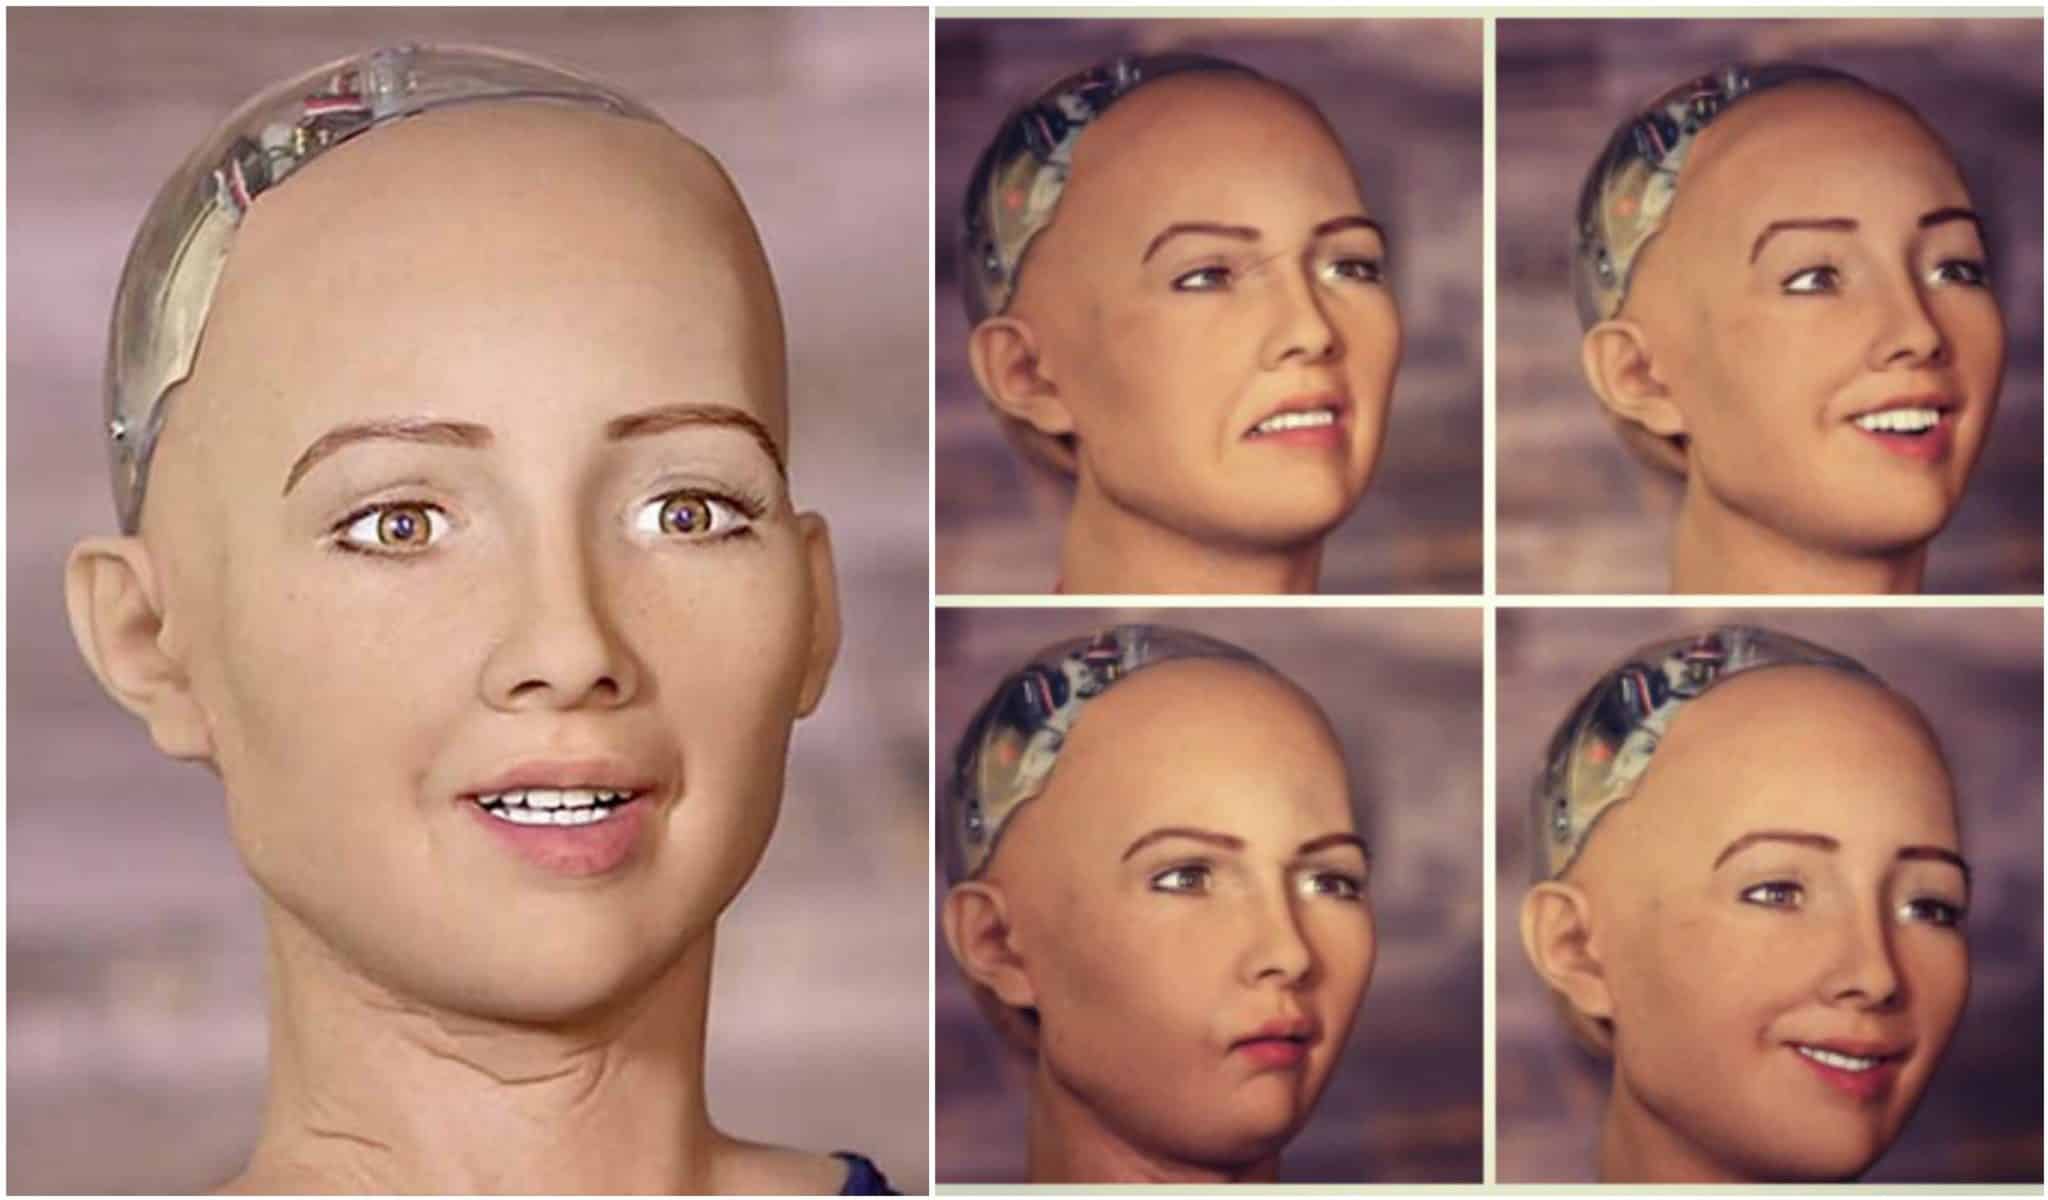 Beware Humankind, Sophia the Robot Vowed to Destroy Us All!